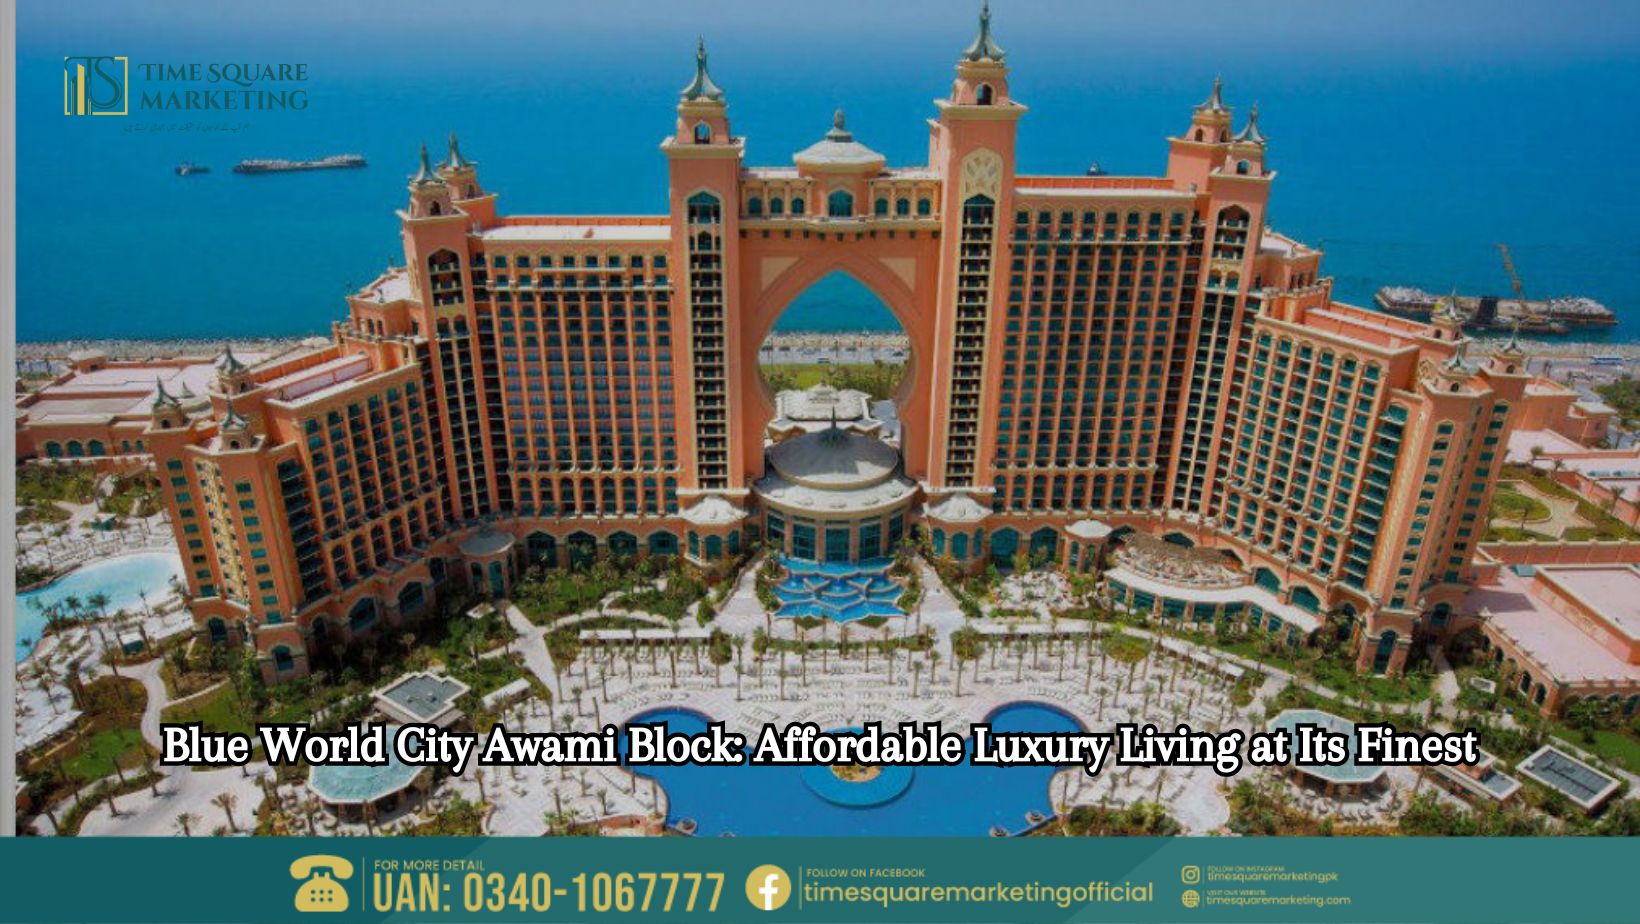 Blue World City Awami Block Affordable Luxury Living at Its Finest